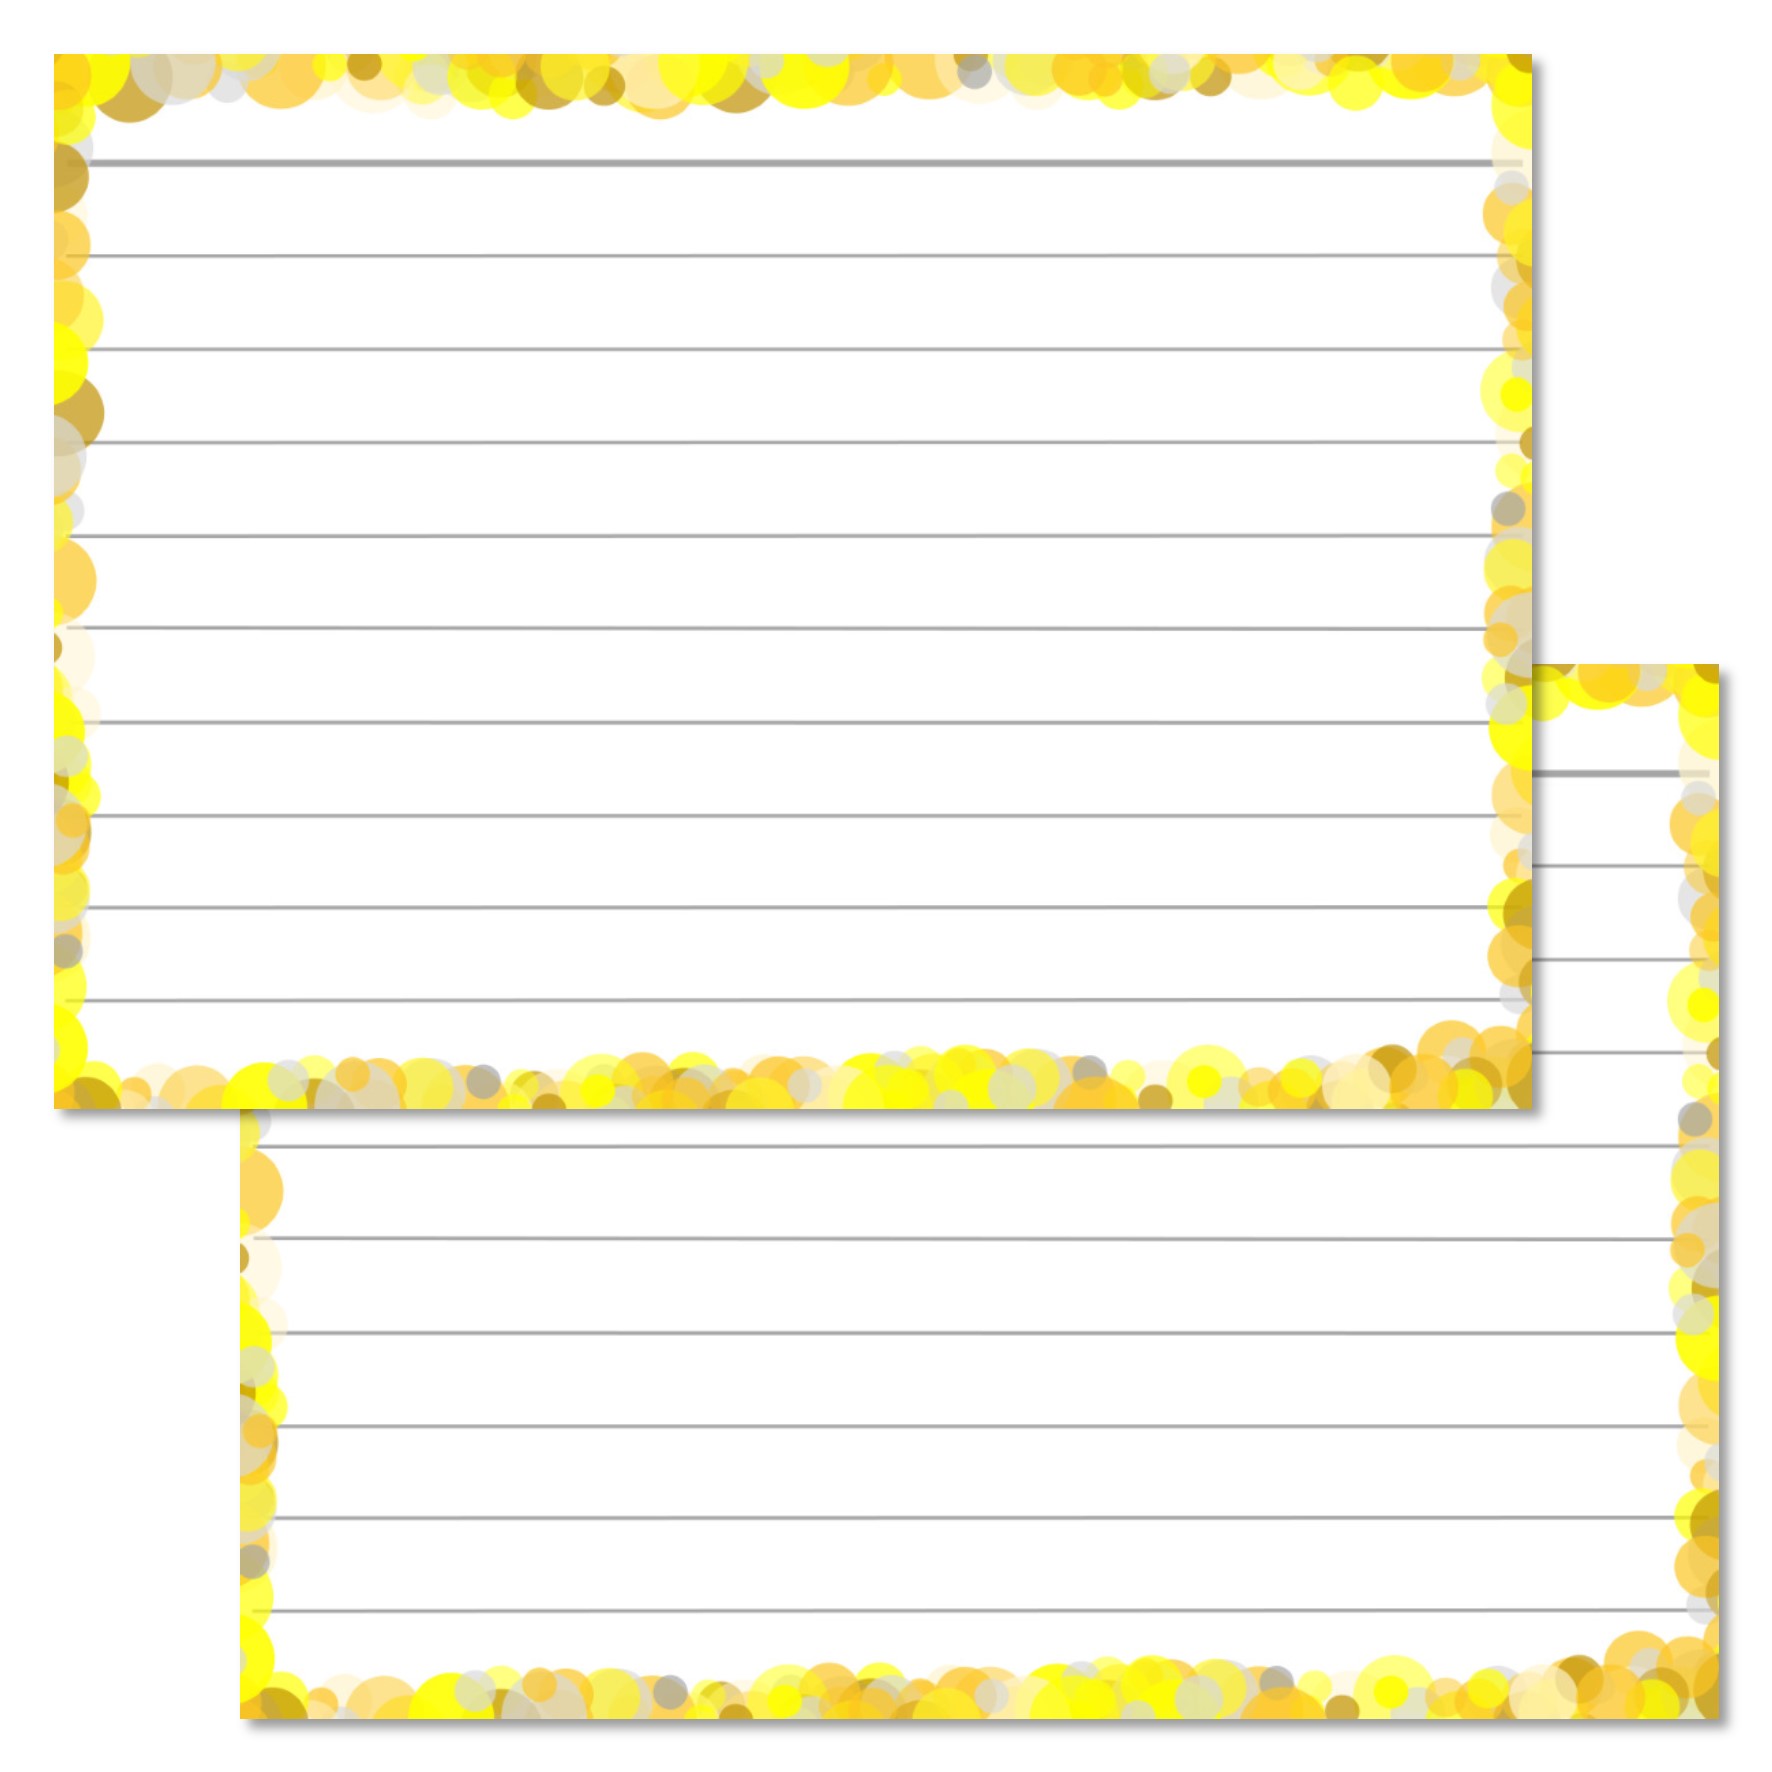 Yellow Confetti Leitner Flashcards A7 - The original Leitner